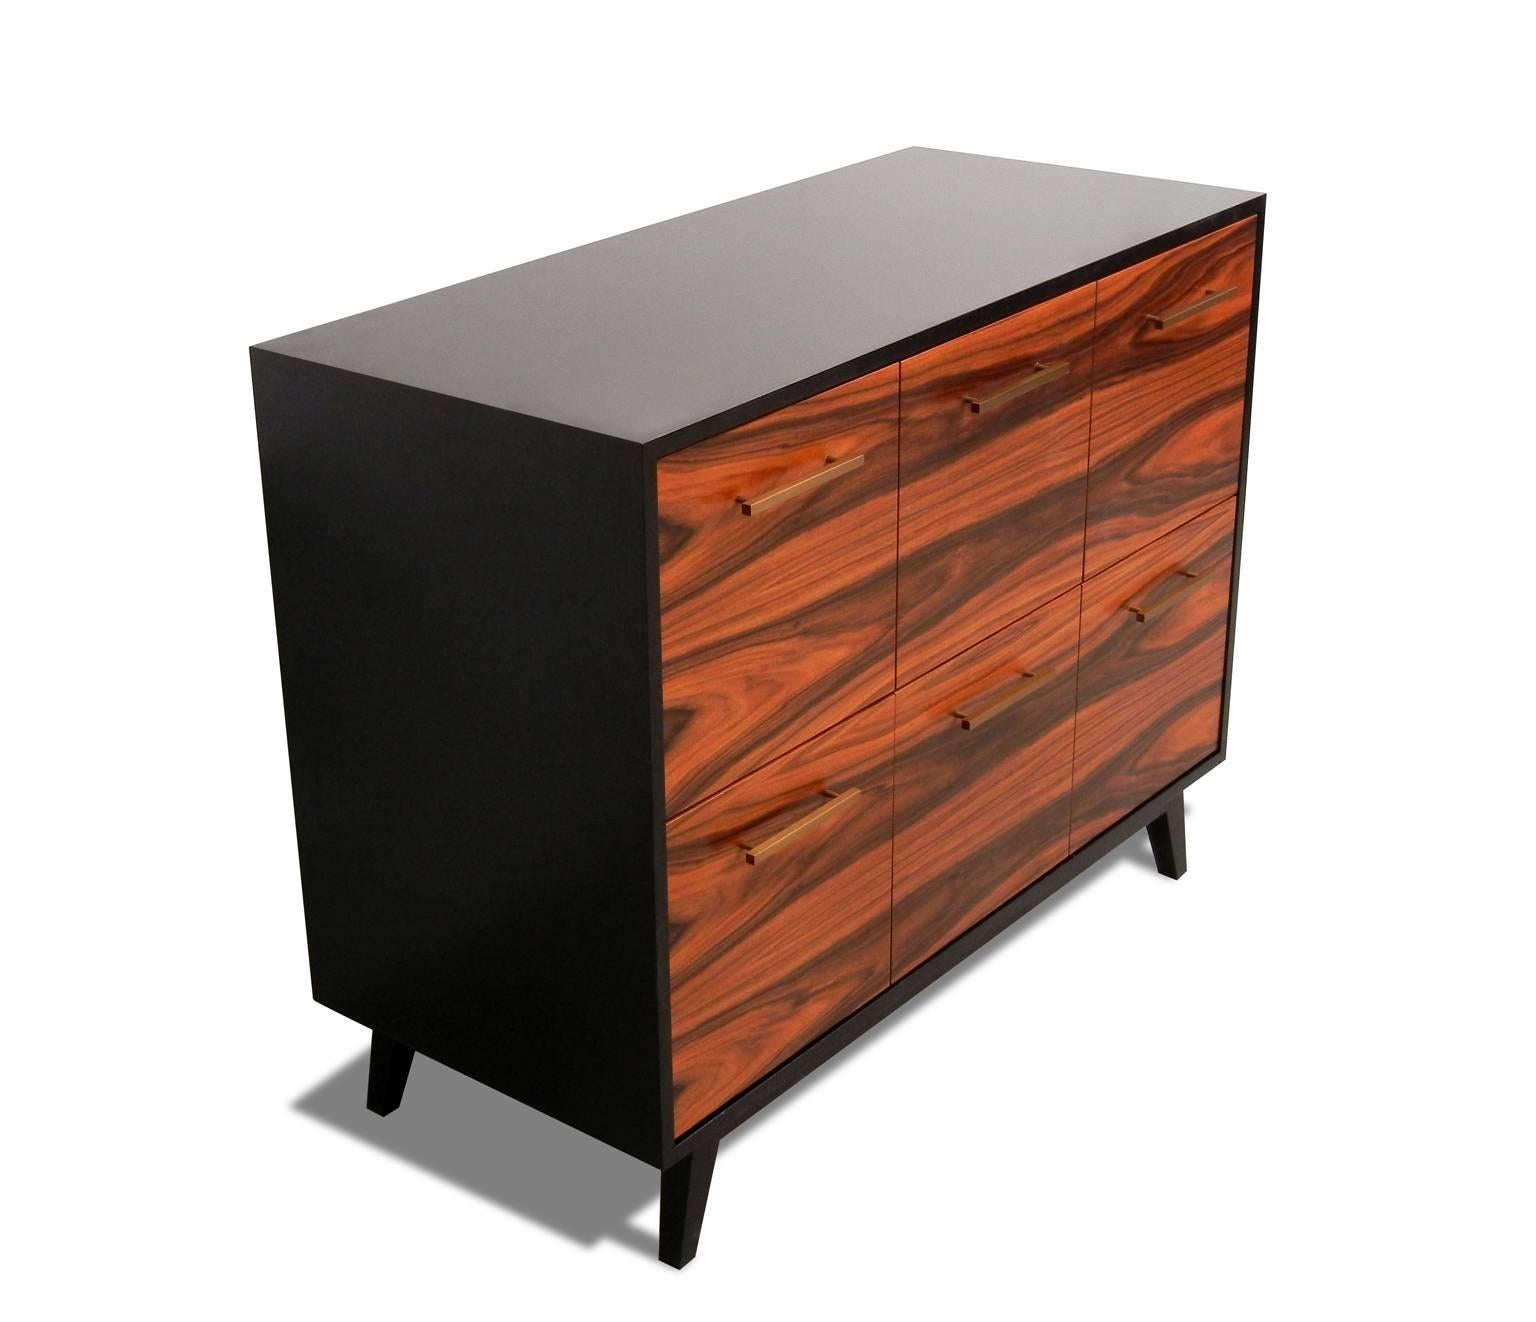 The Atocha Design Record cabinet is a handcrafted furniture piece that gives you quick access to your music collection—and elegant storage when it's not in use.

The featured piece uses santos palisander hardwood veneer, a sustainable species